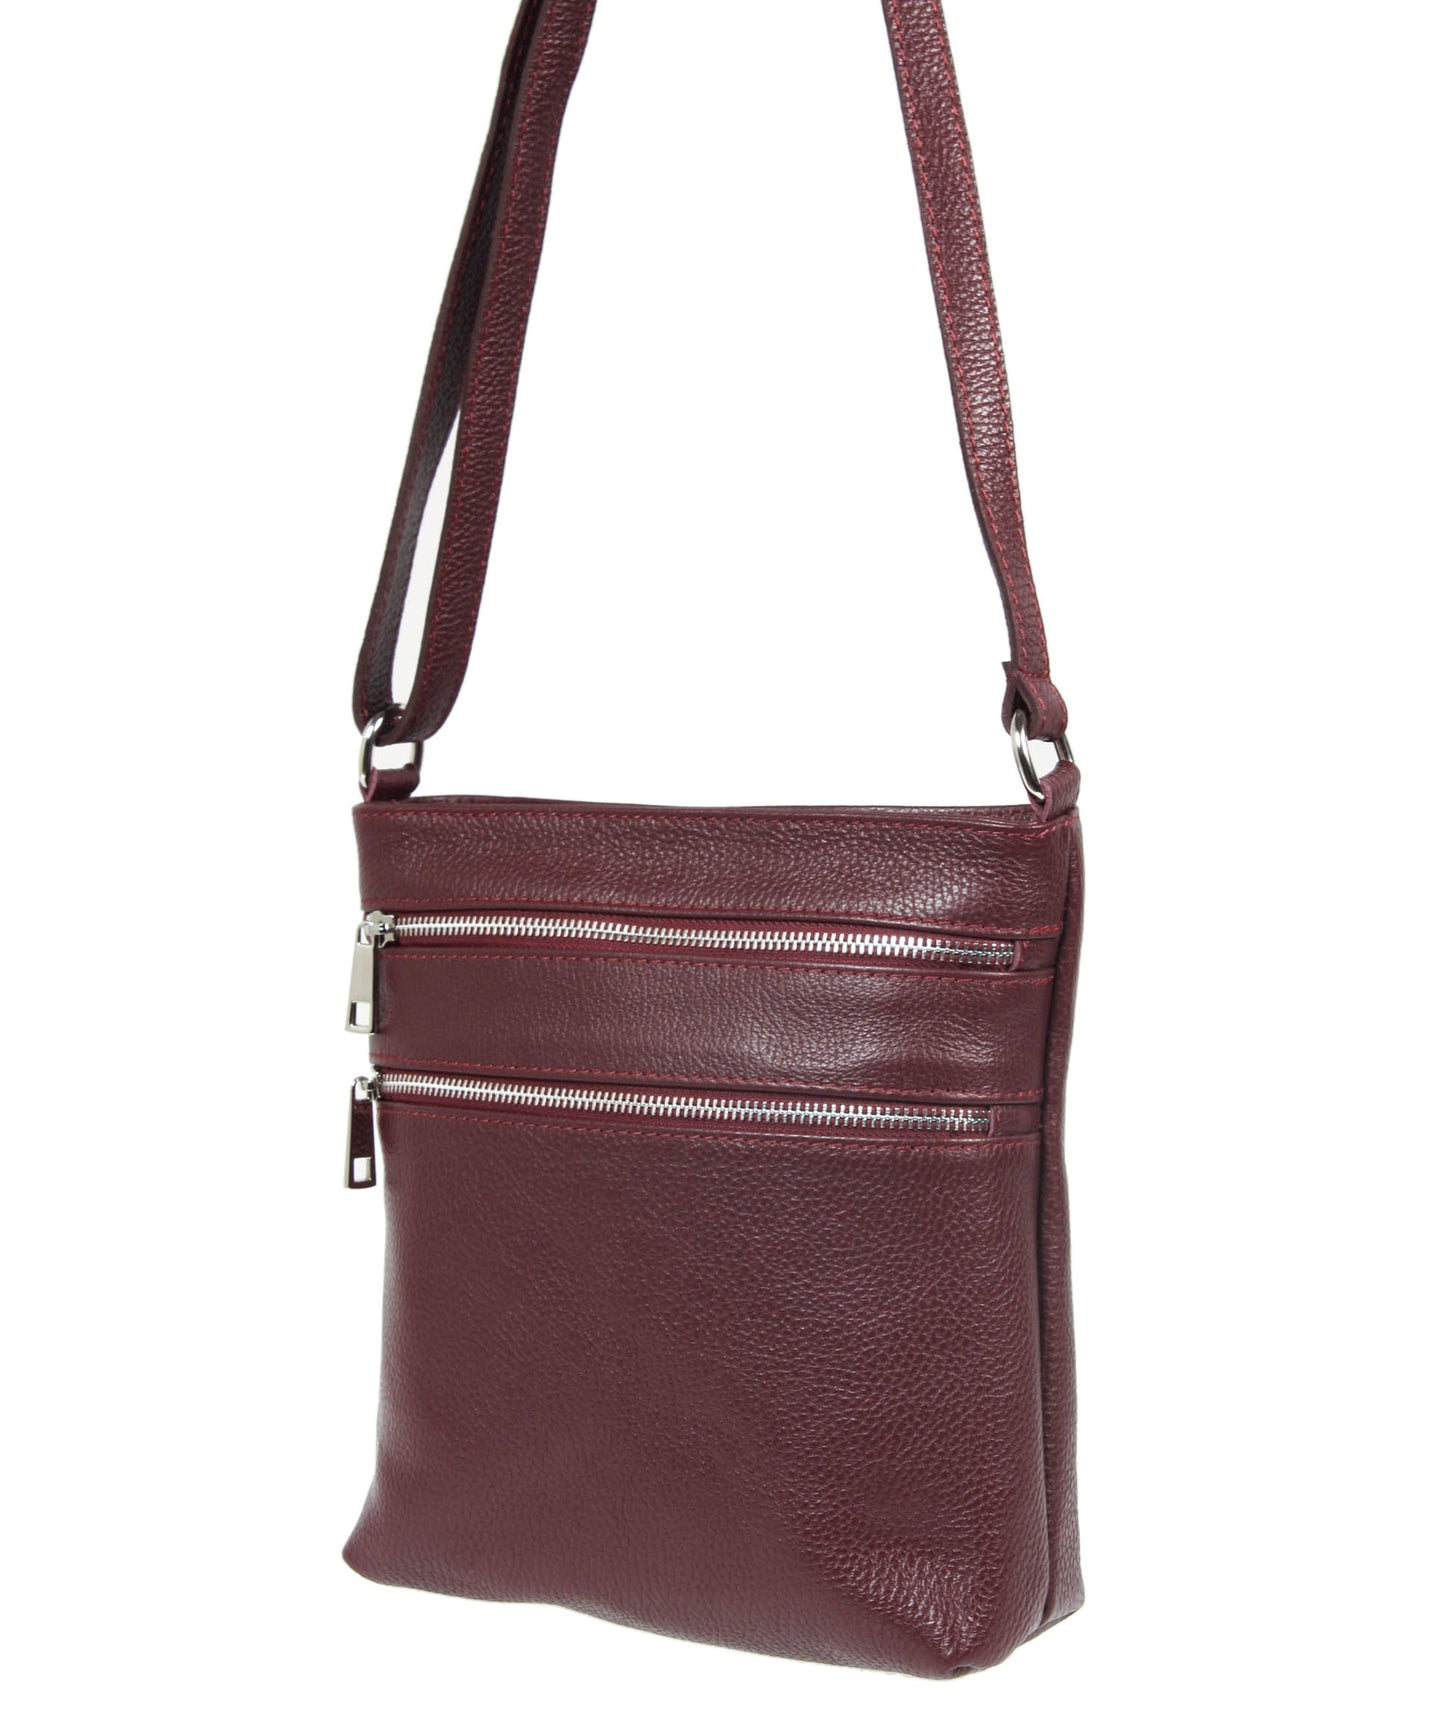 Cross body bags Twinset - Expandable shoulder bag in tan color -  TA723700057CUOIO